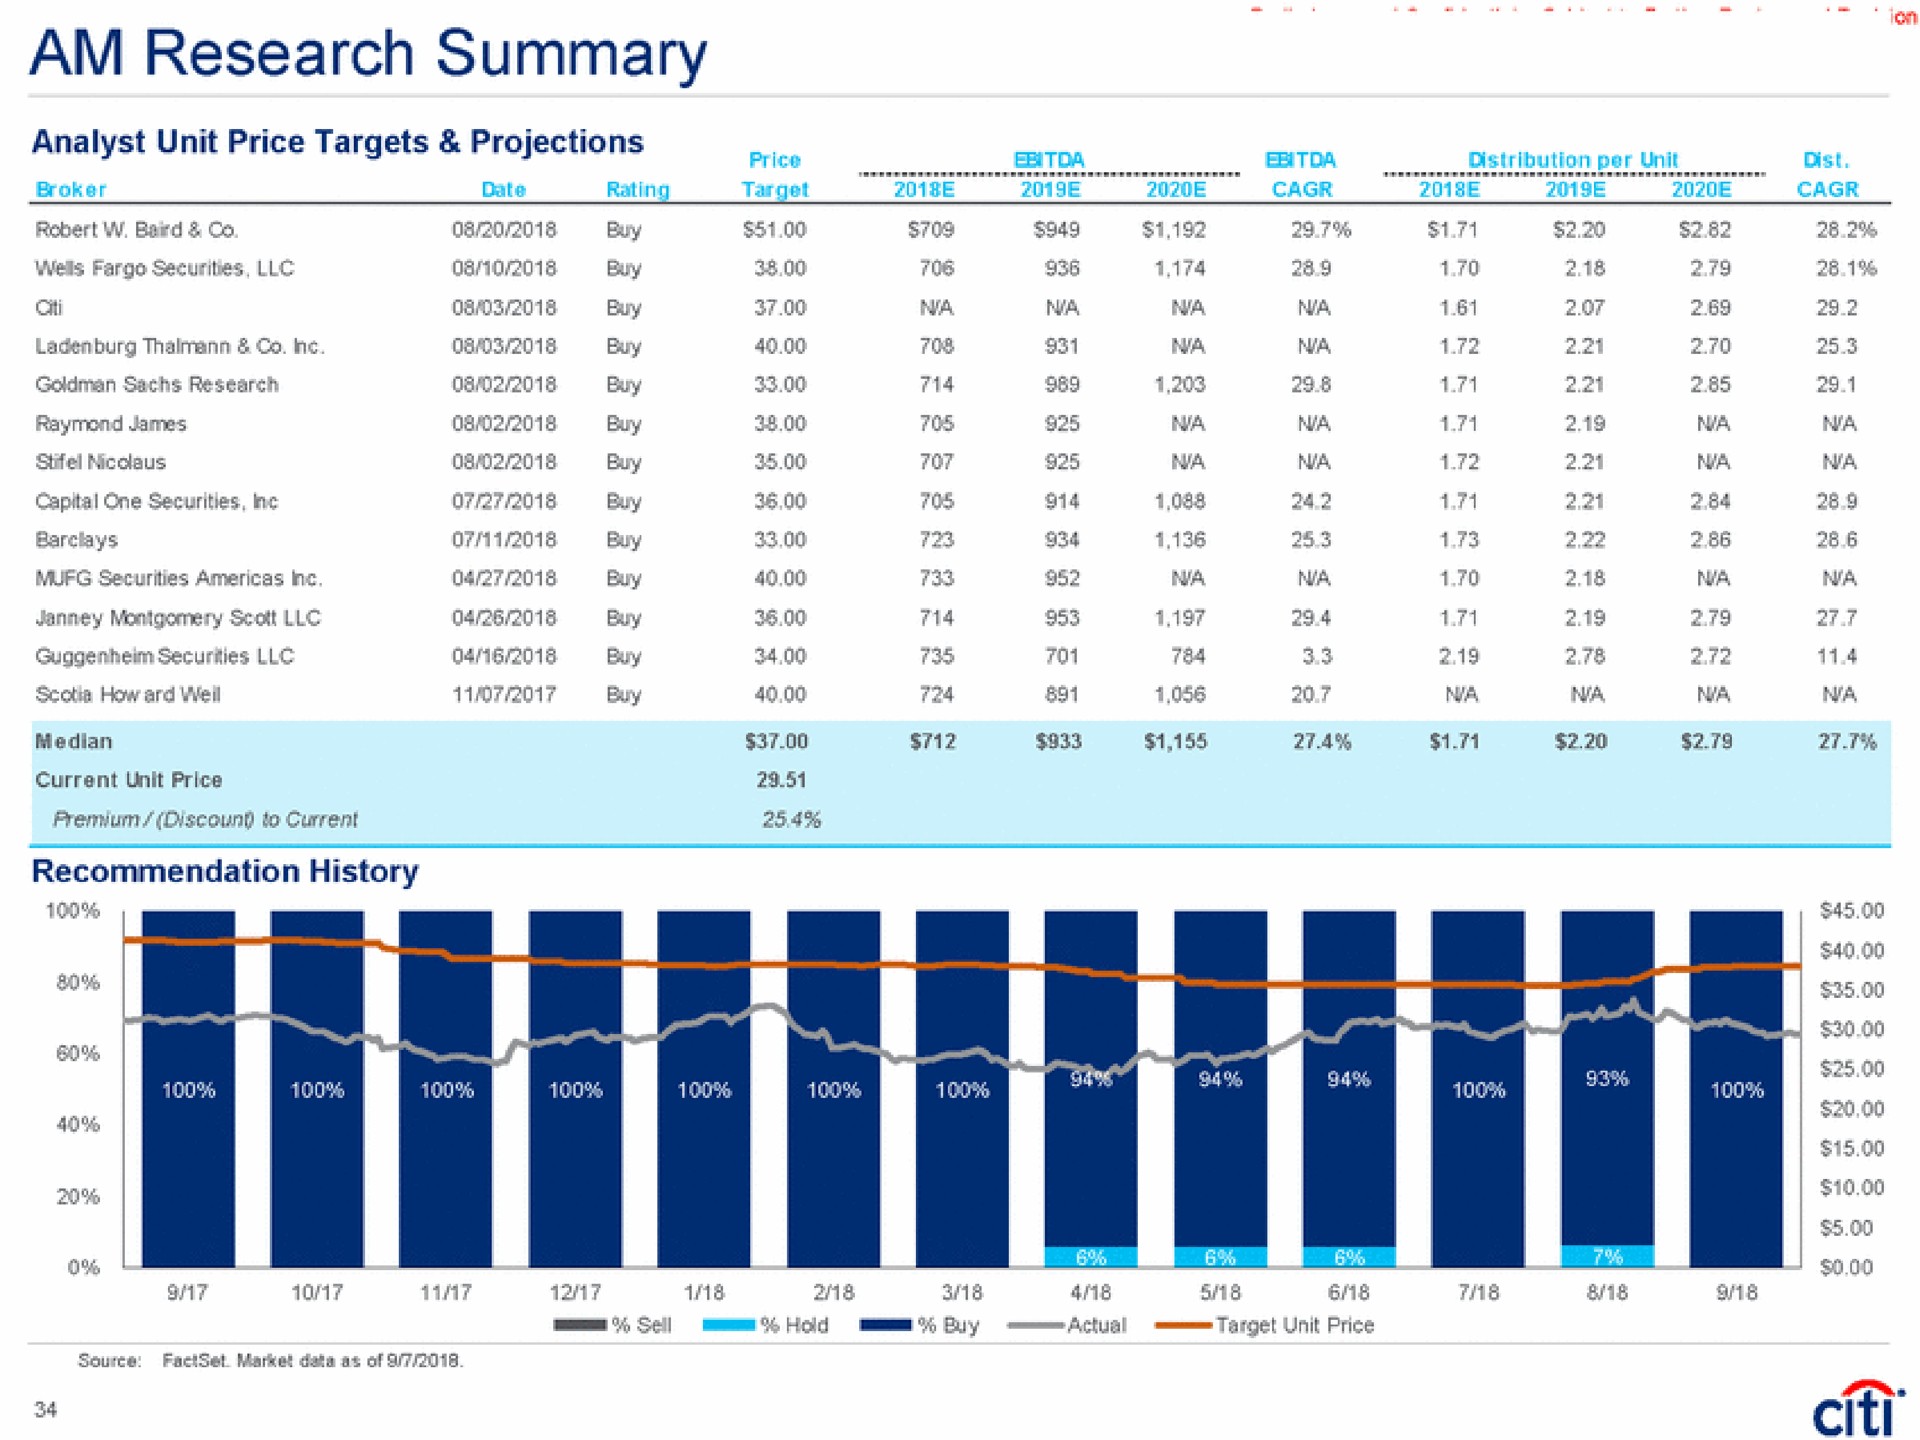 am research summary analyst unit price targets projections recommendation history | Citi